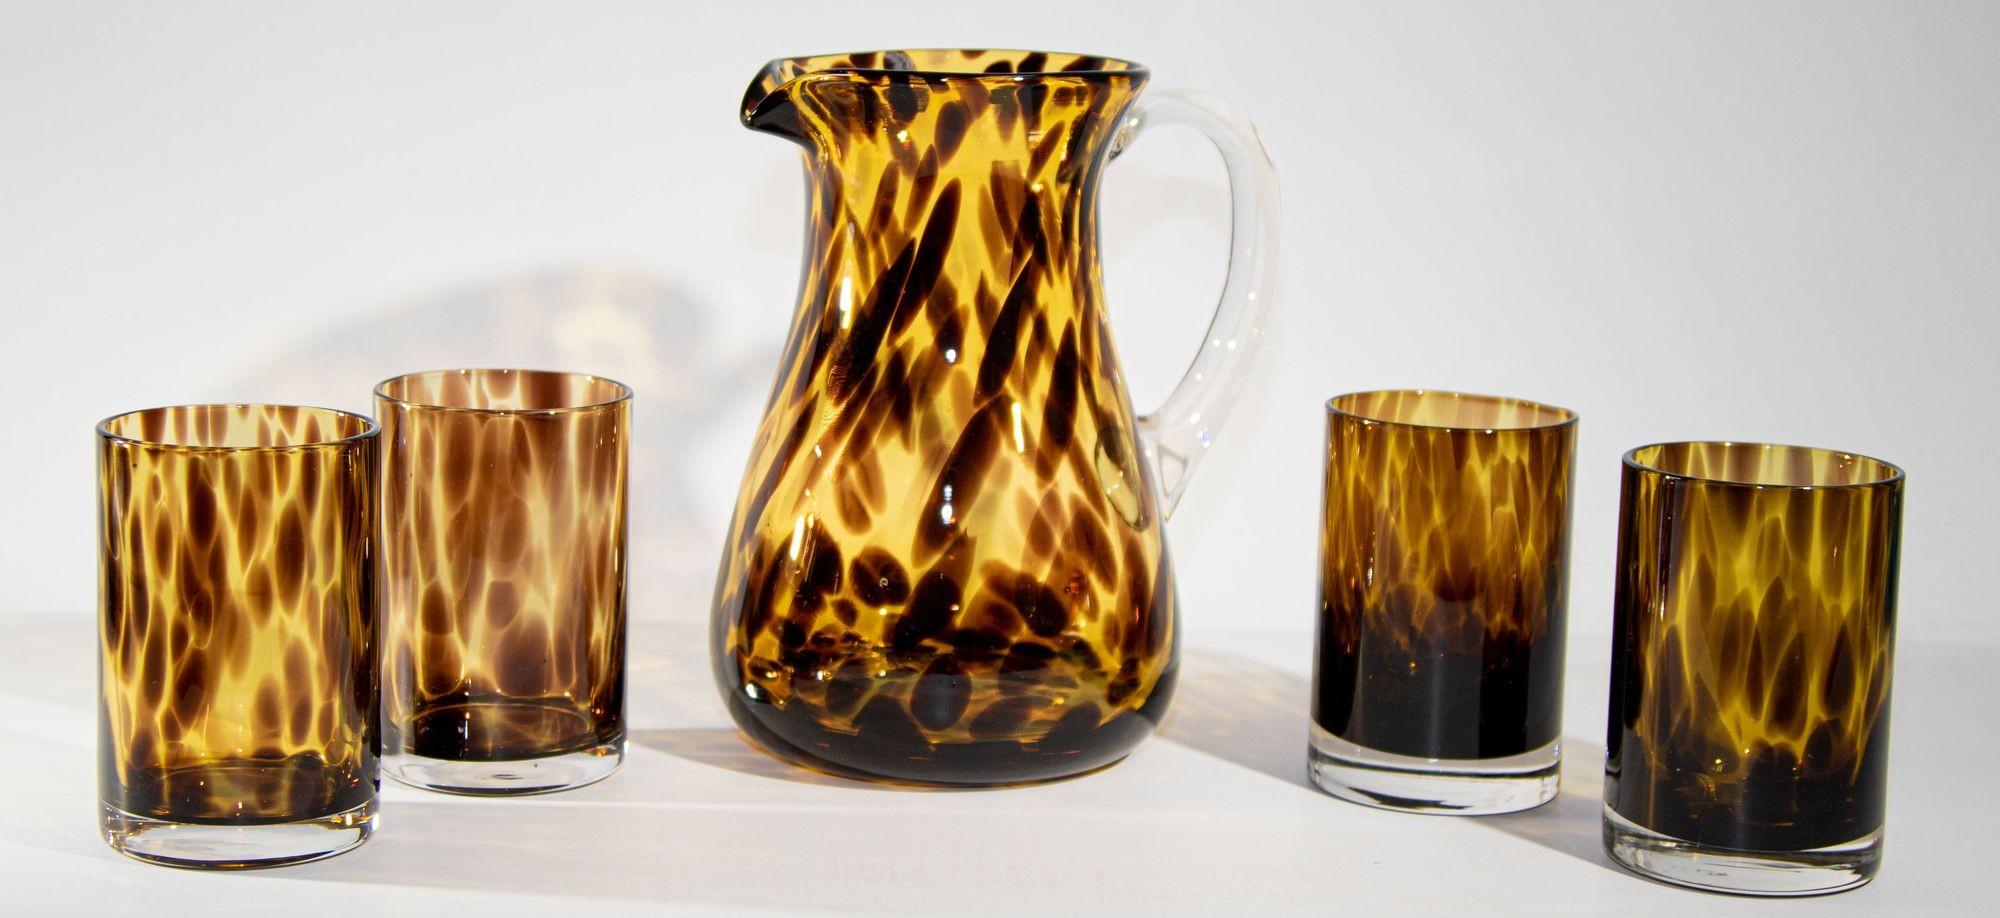 Vintage barware set of hand-blown glass pitcher with four glasses in a tortoise shell pattern.
Elegant barware hand blown tortoise shell glass pitcher amber with clear glass handle and glasses.
A distinctive tortoise shell motif brings rich color